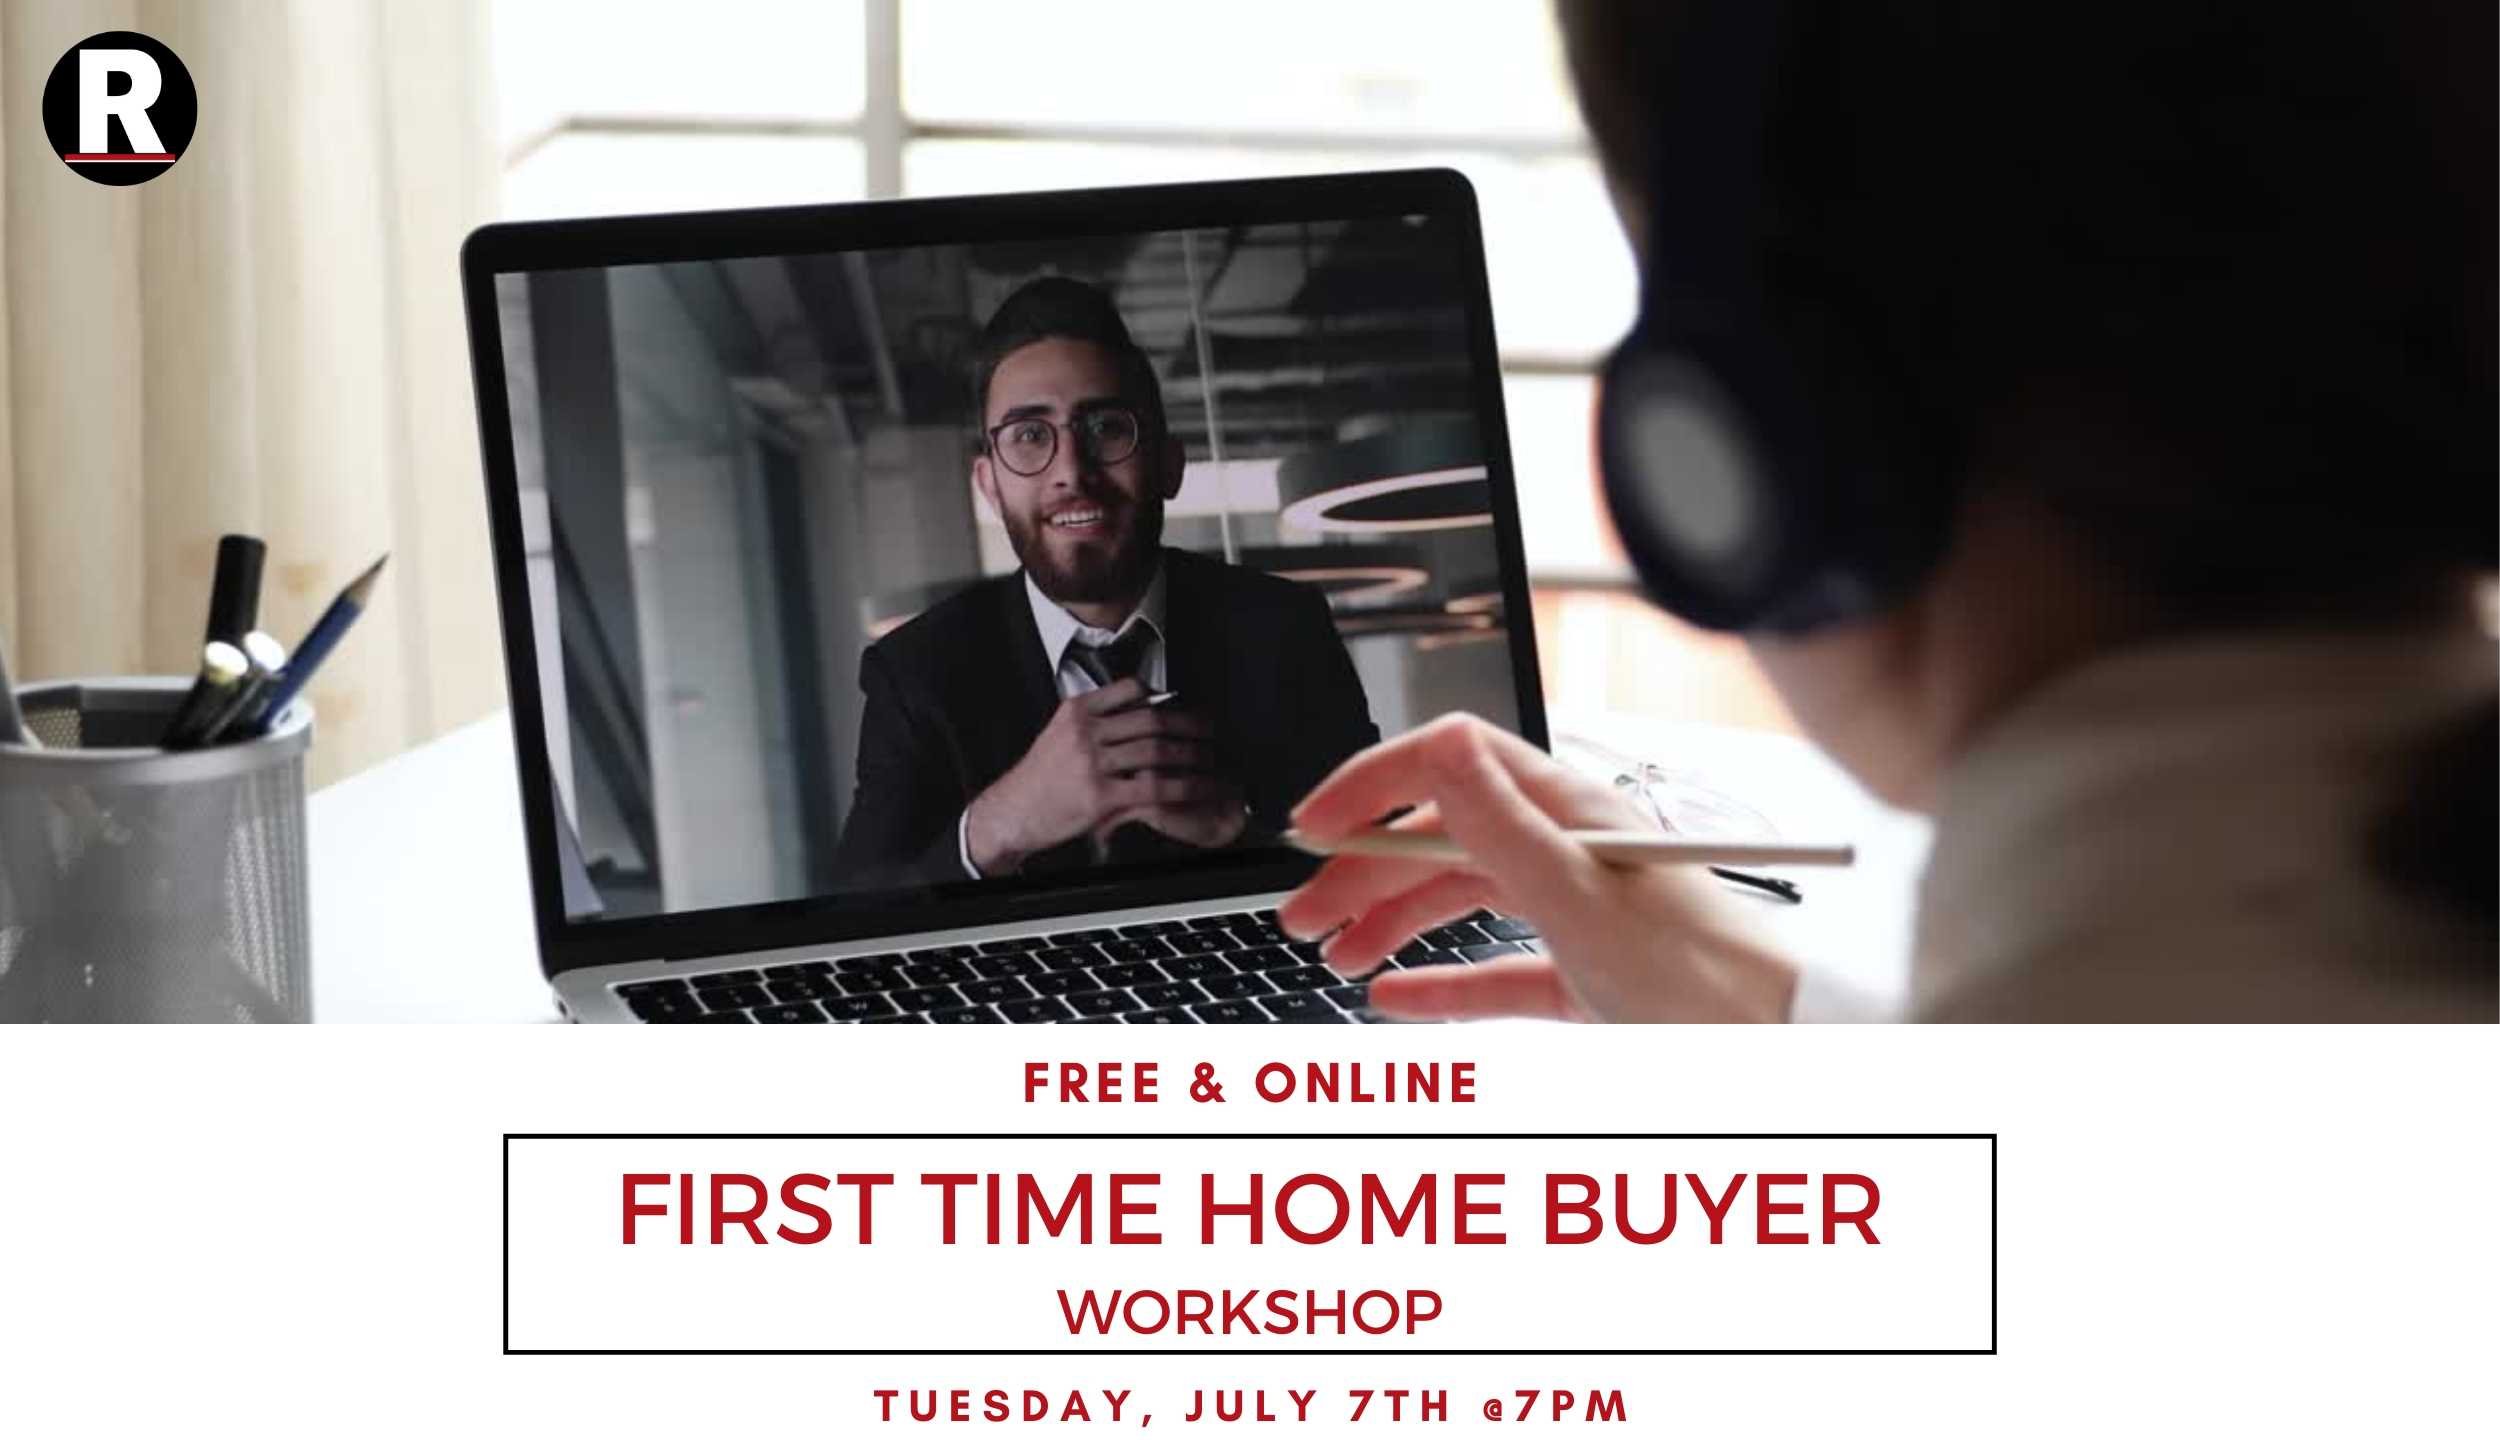 First Time Home Buyer Workshop – FREE and ONLINE!